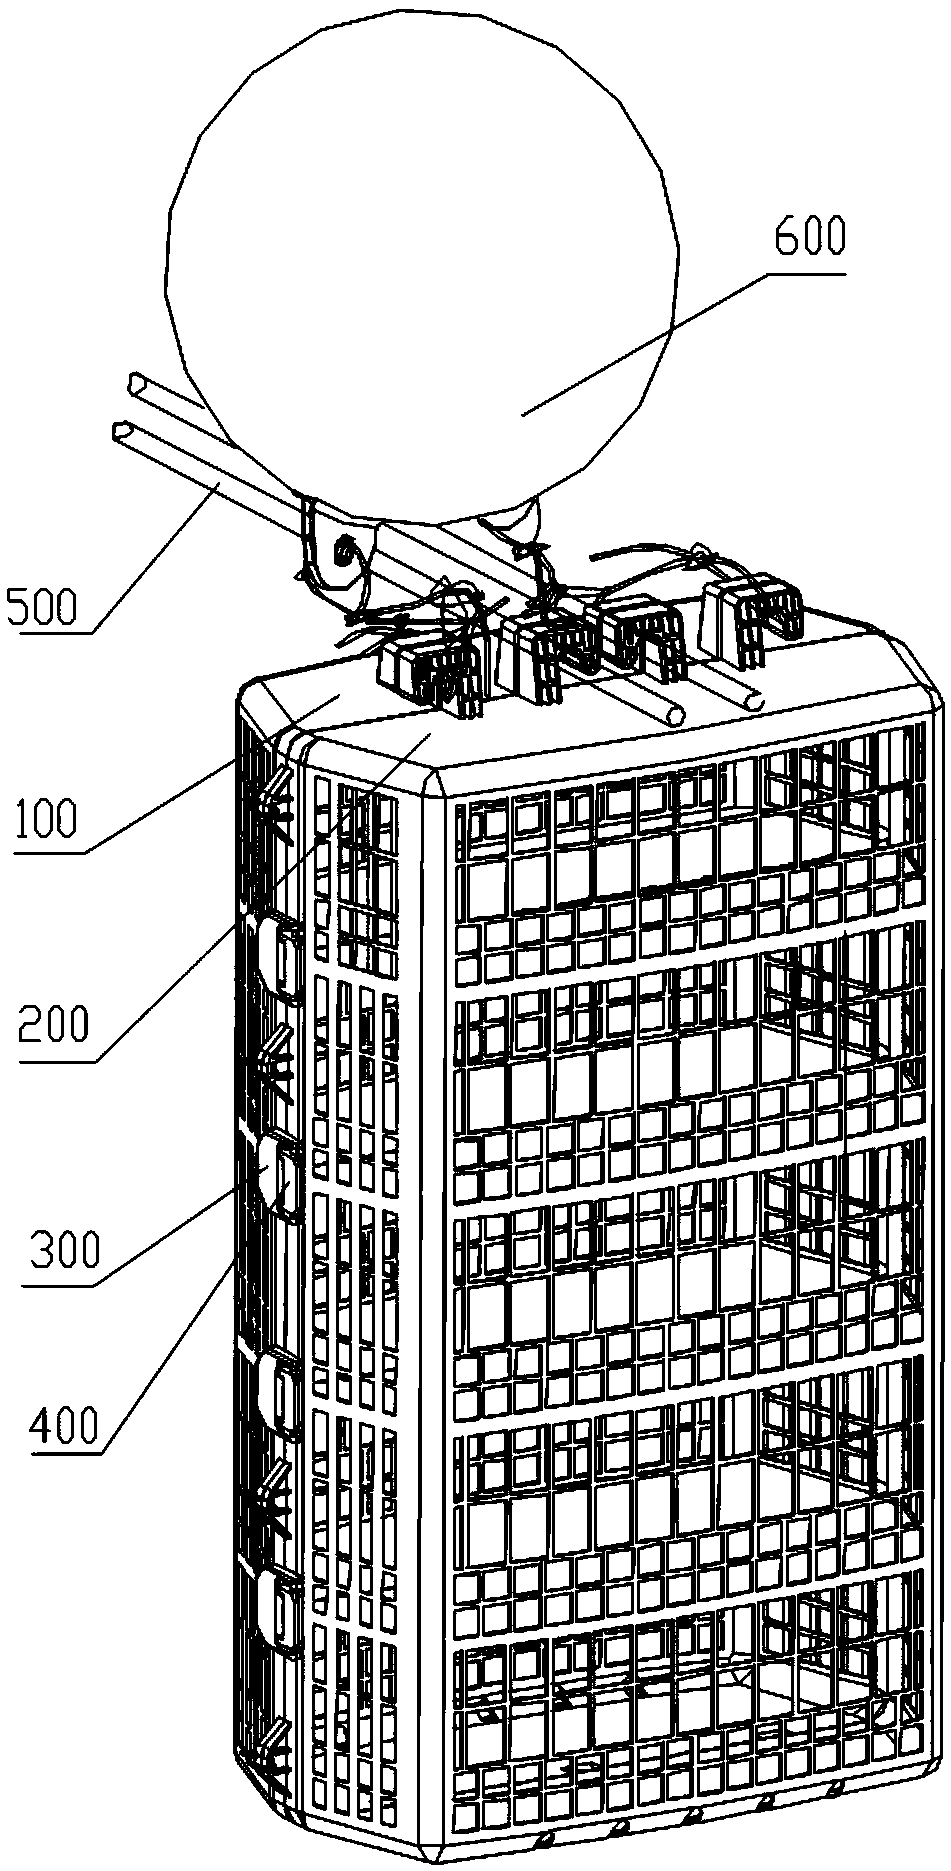 Device for cultivating oyster